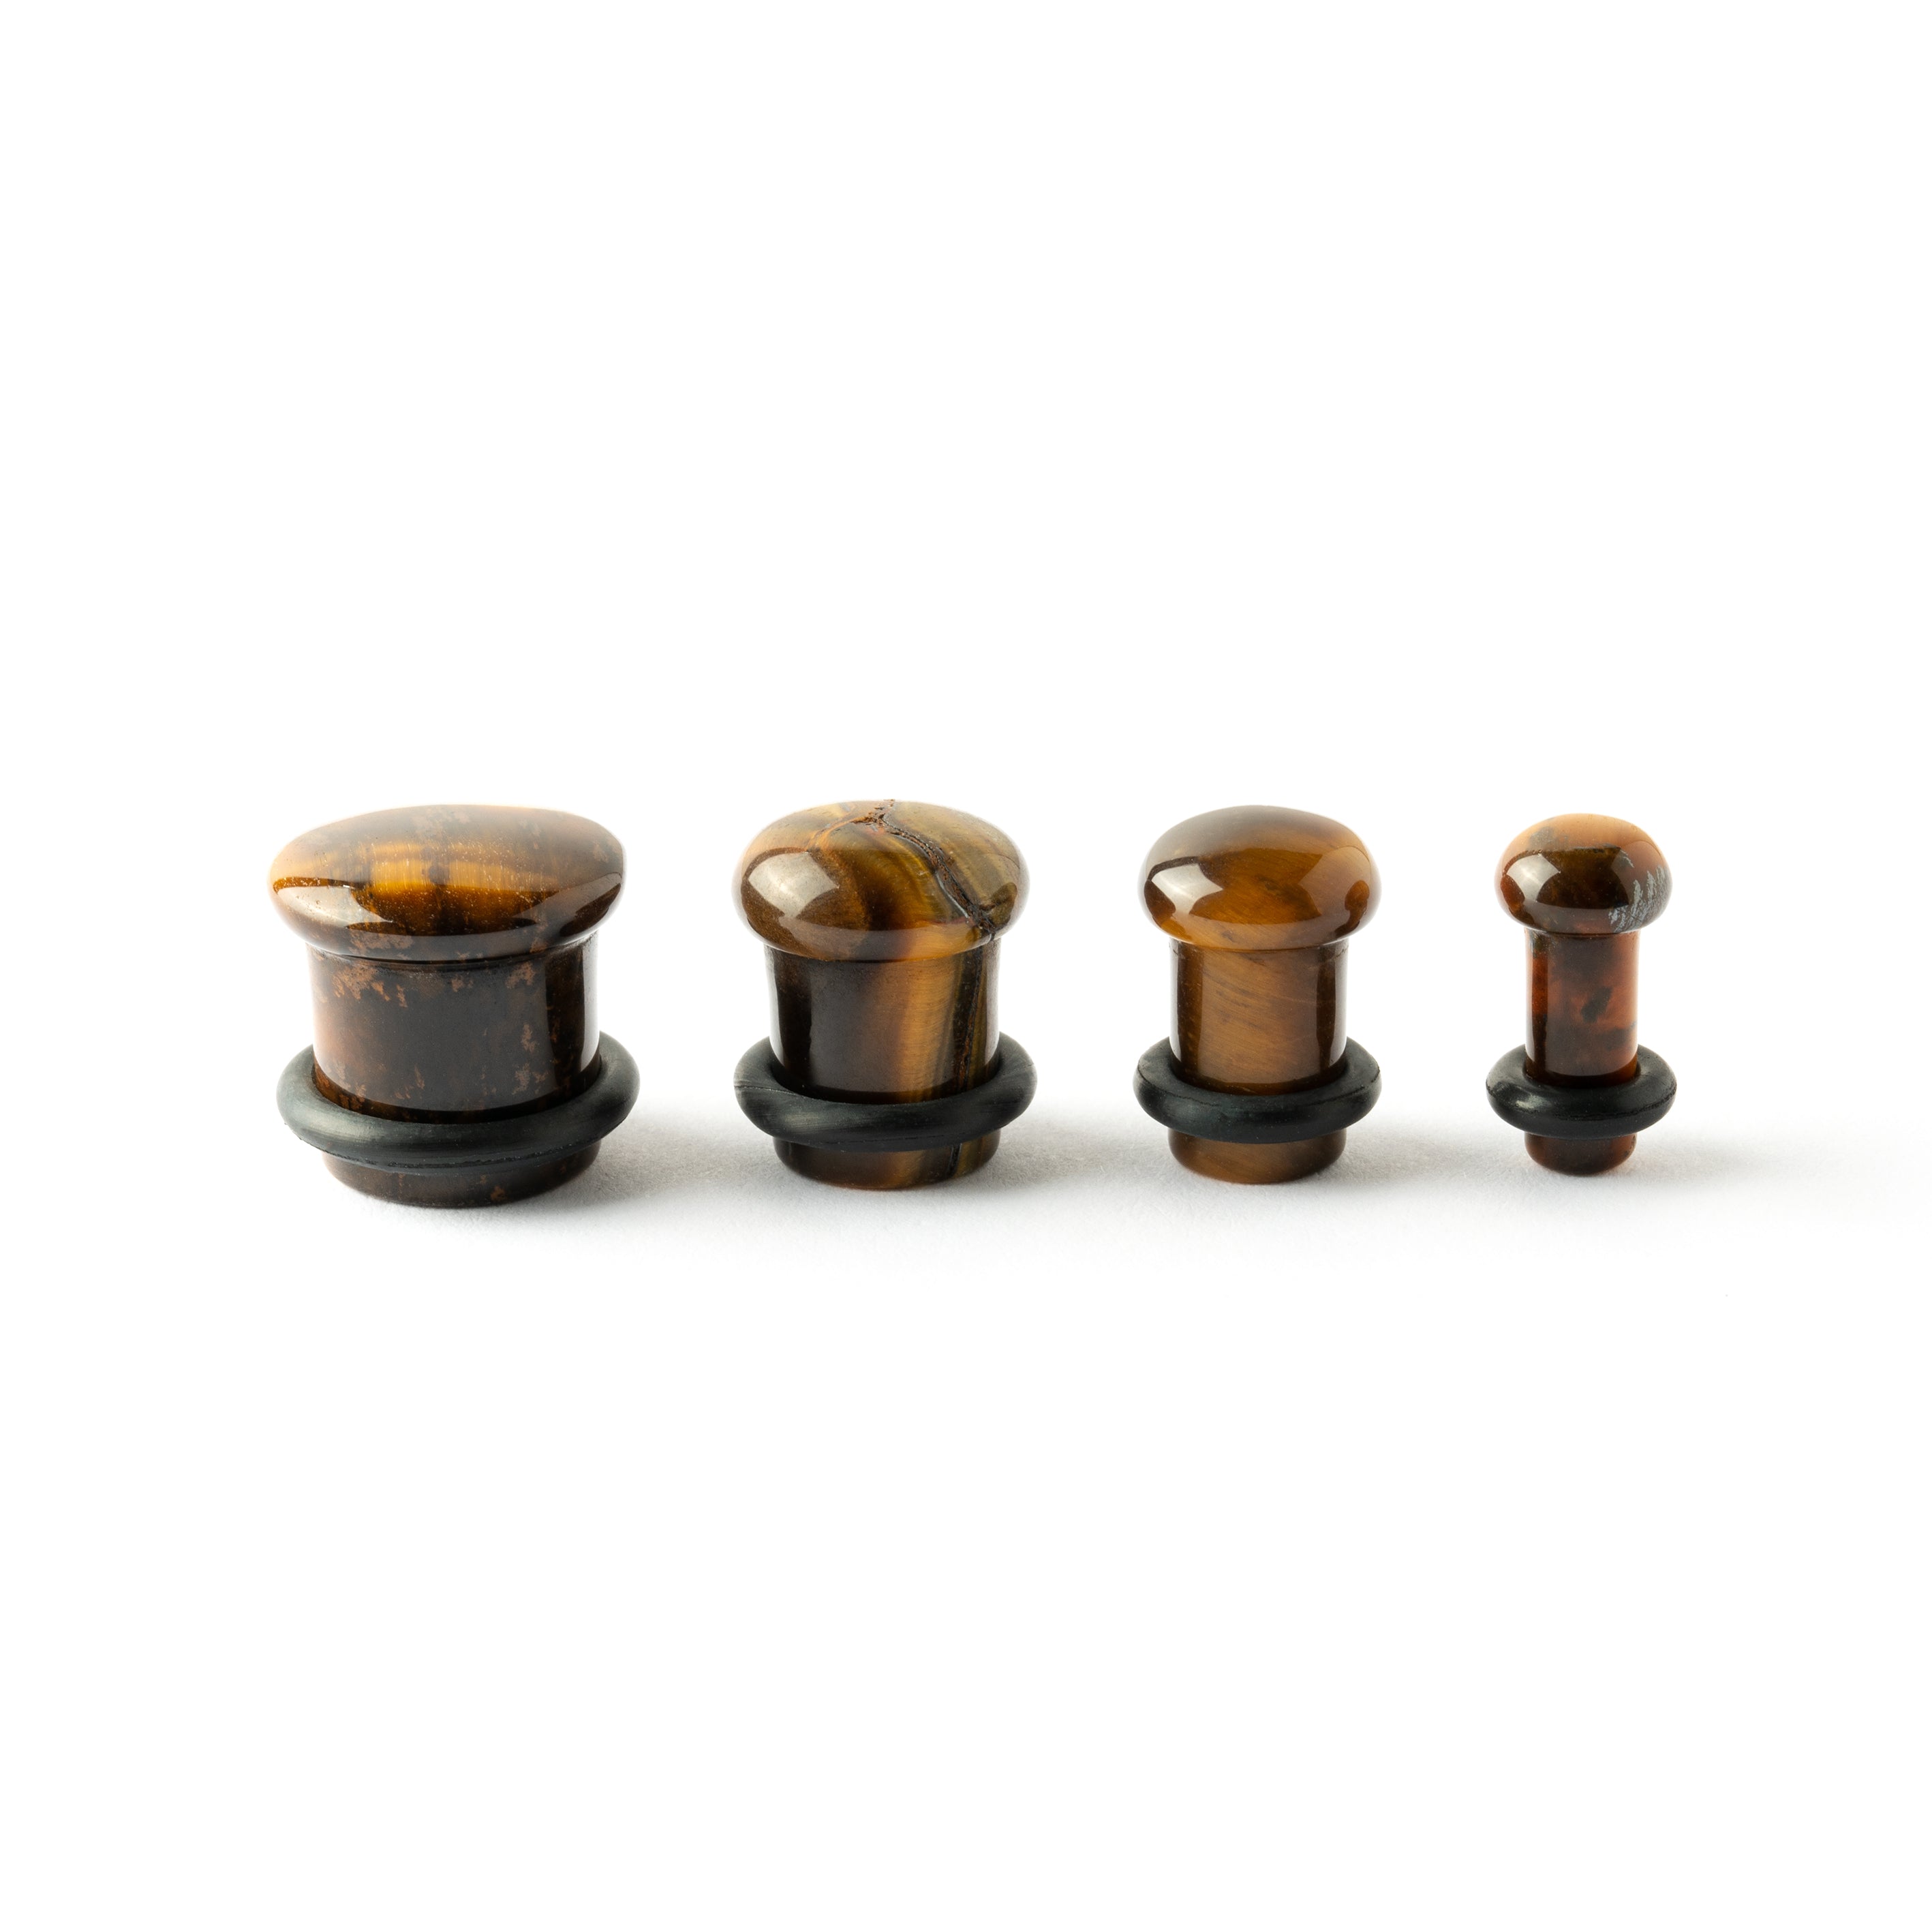 several sizes of Single Flare Tiger Eye stone ear plugs side view